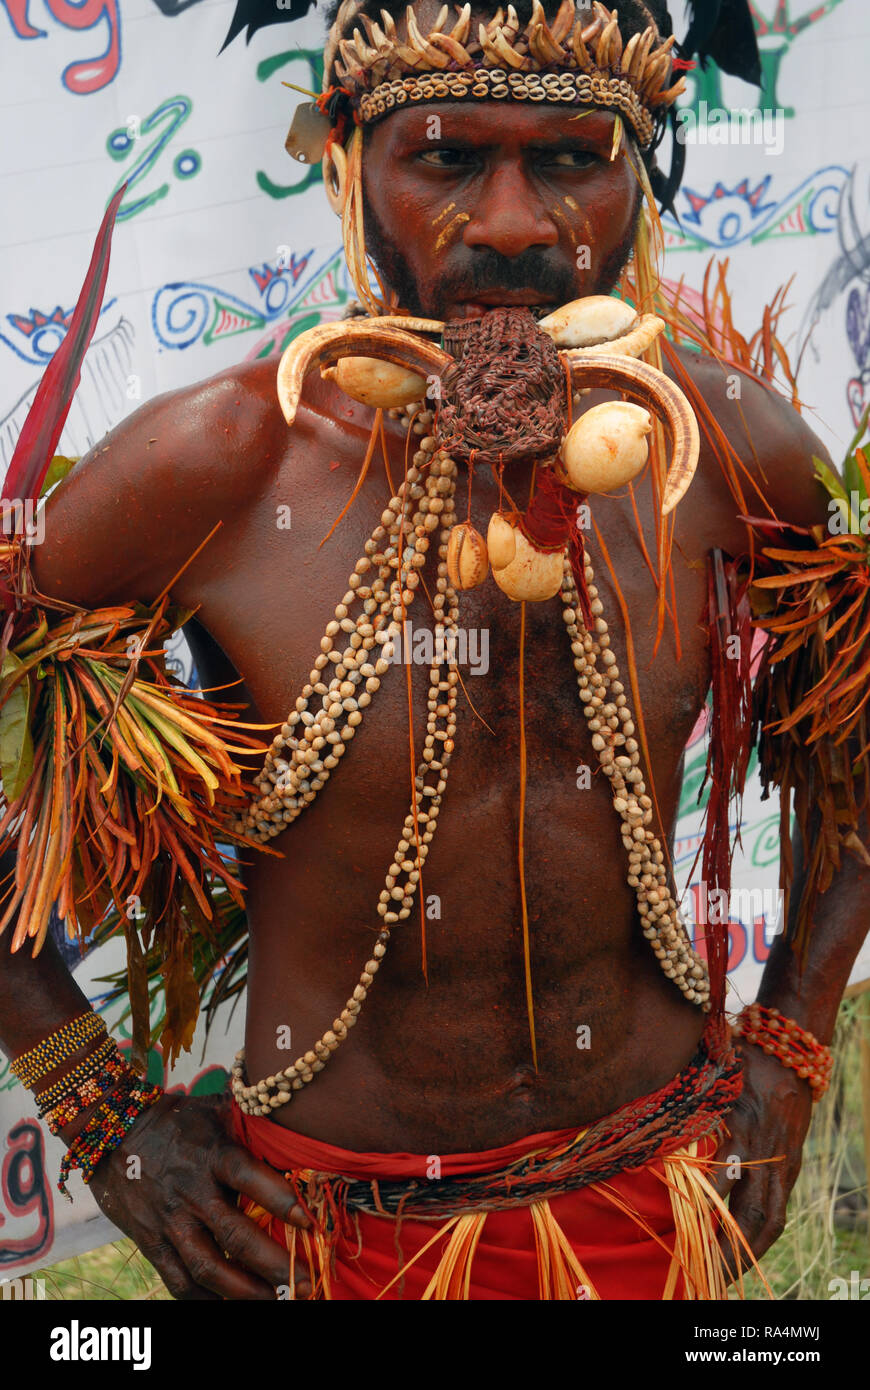 Colourfully dressed and face painted man wearing a neckless made from shells and hornbill beaks as part of a Sing Sing in Madang, Papua New Guinea. Stock Photo